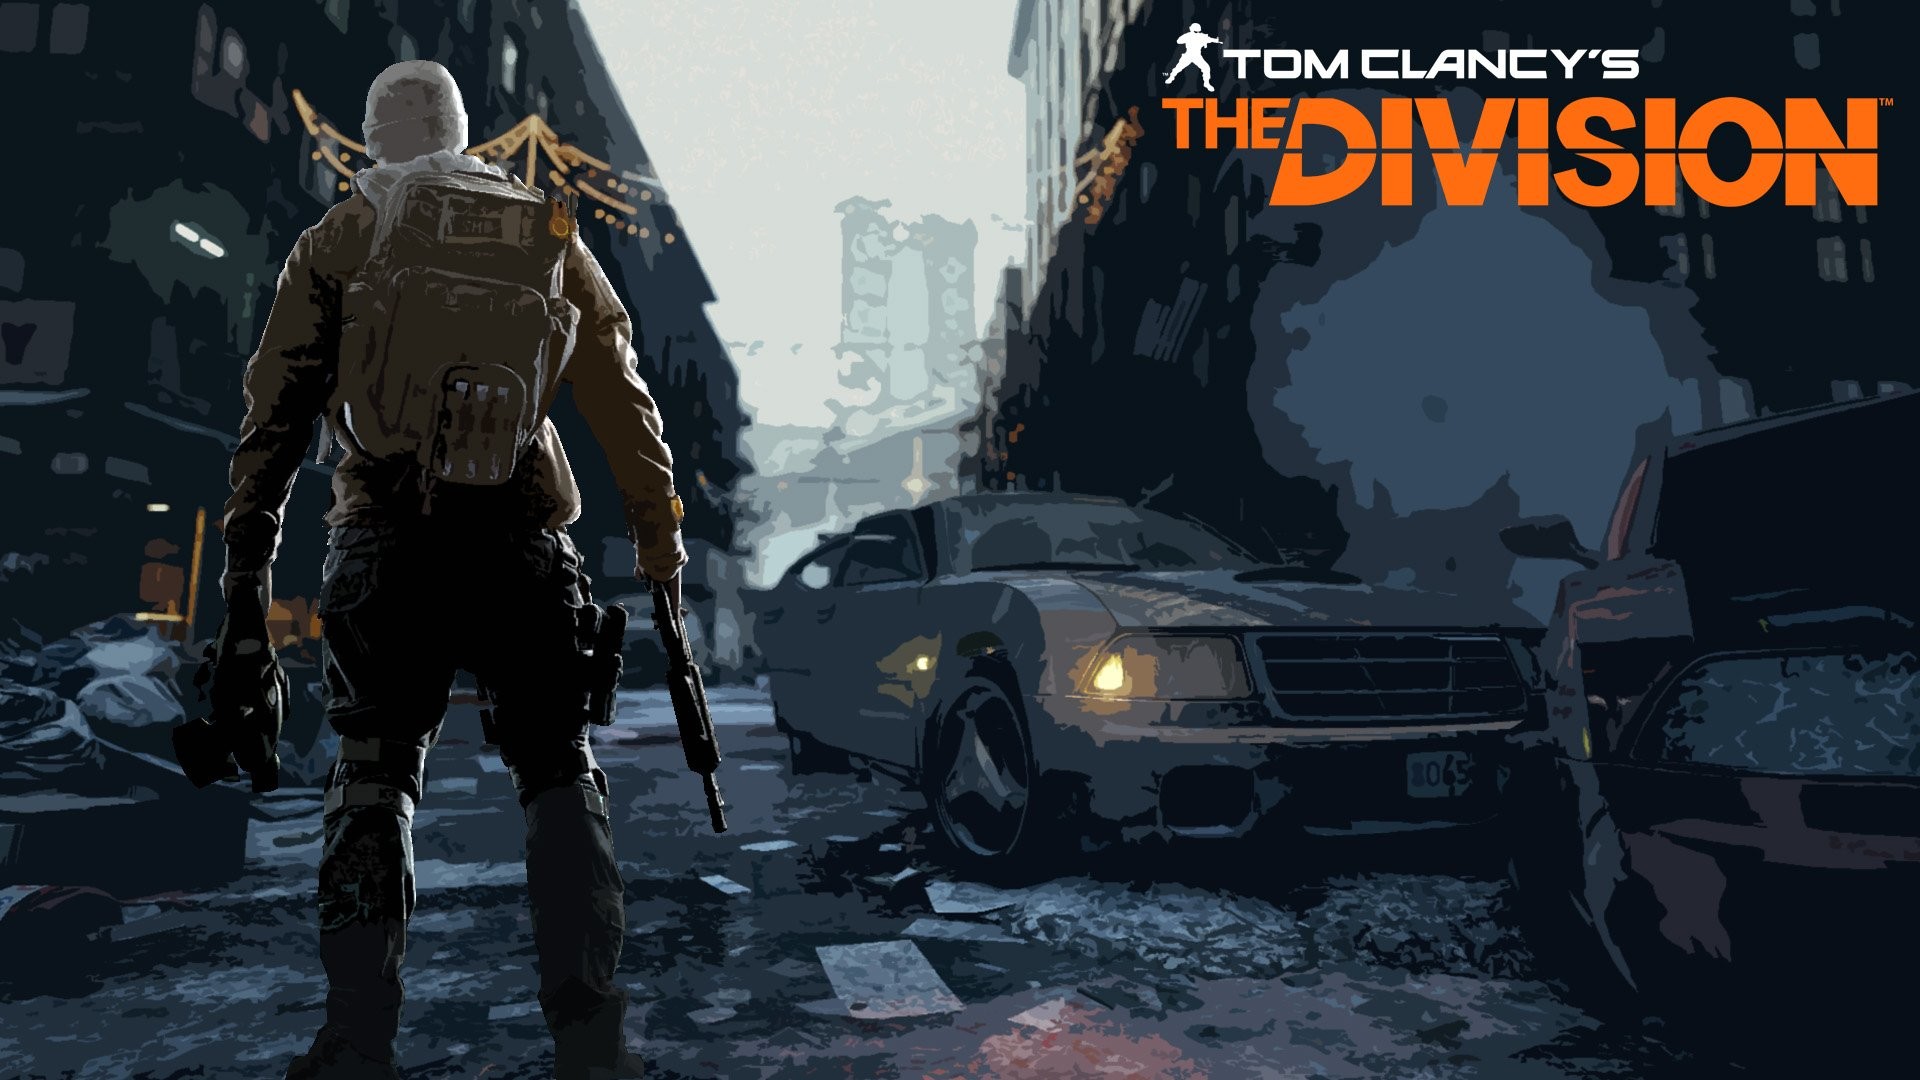 Tom clancys the division wallpaper awesome images 180qp8d246